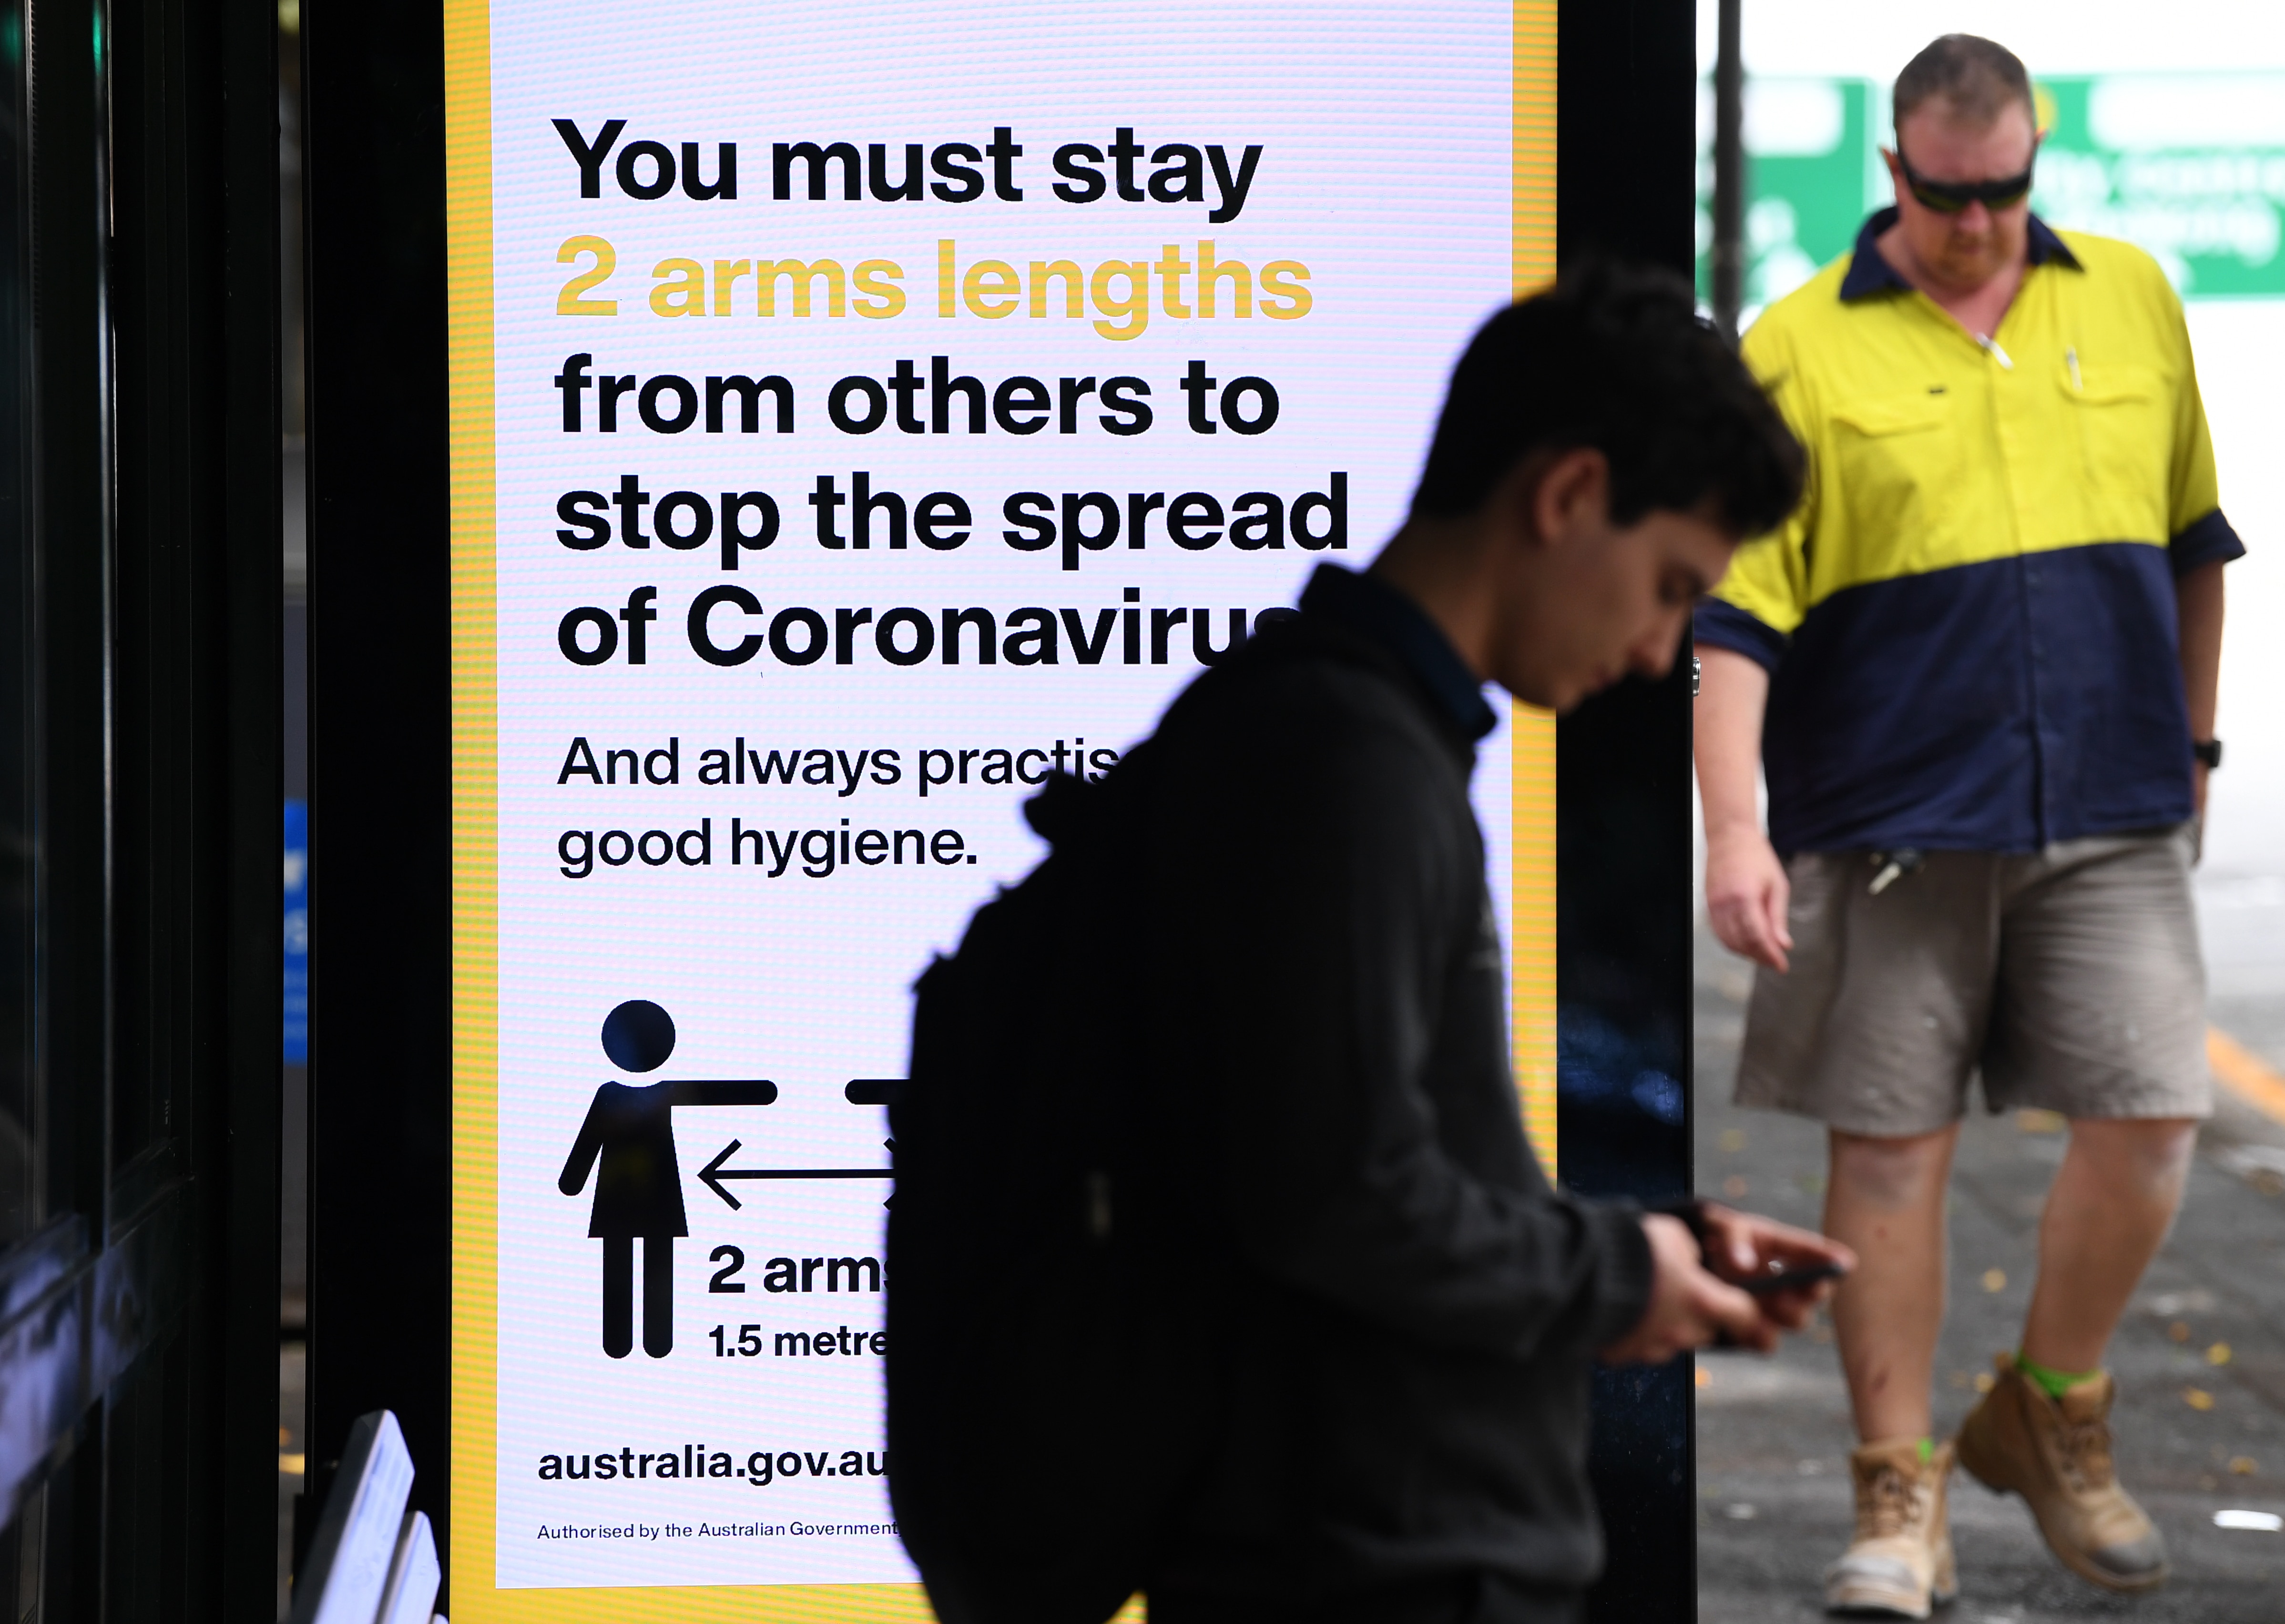  A shutdown of non-essential services as well as domestic and international travel restrictions are in effect Australia wide in a bid to slow the spread of the COVID-19 coronavirus.